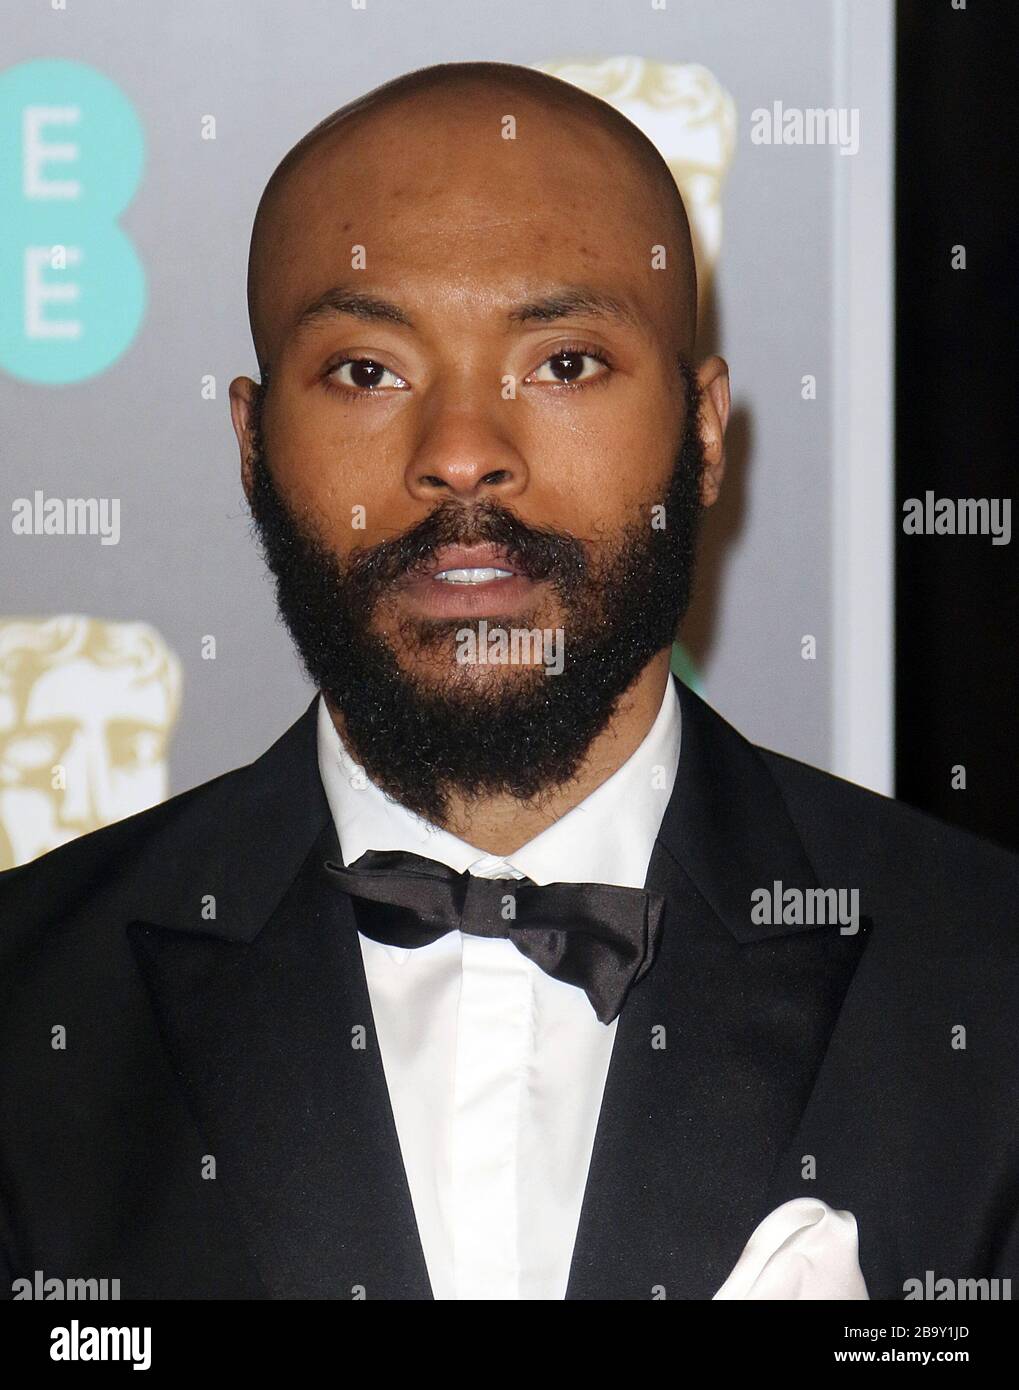 18 févr. 2018 - Londres, Angleterre, Royaume-Uni - EE British Academy Film Awards 2018, Royal Albert Hall photo Shows: Chiwetel Ejiofor Banque D'Images